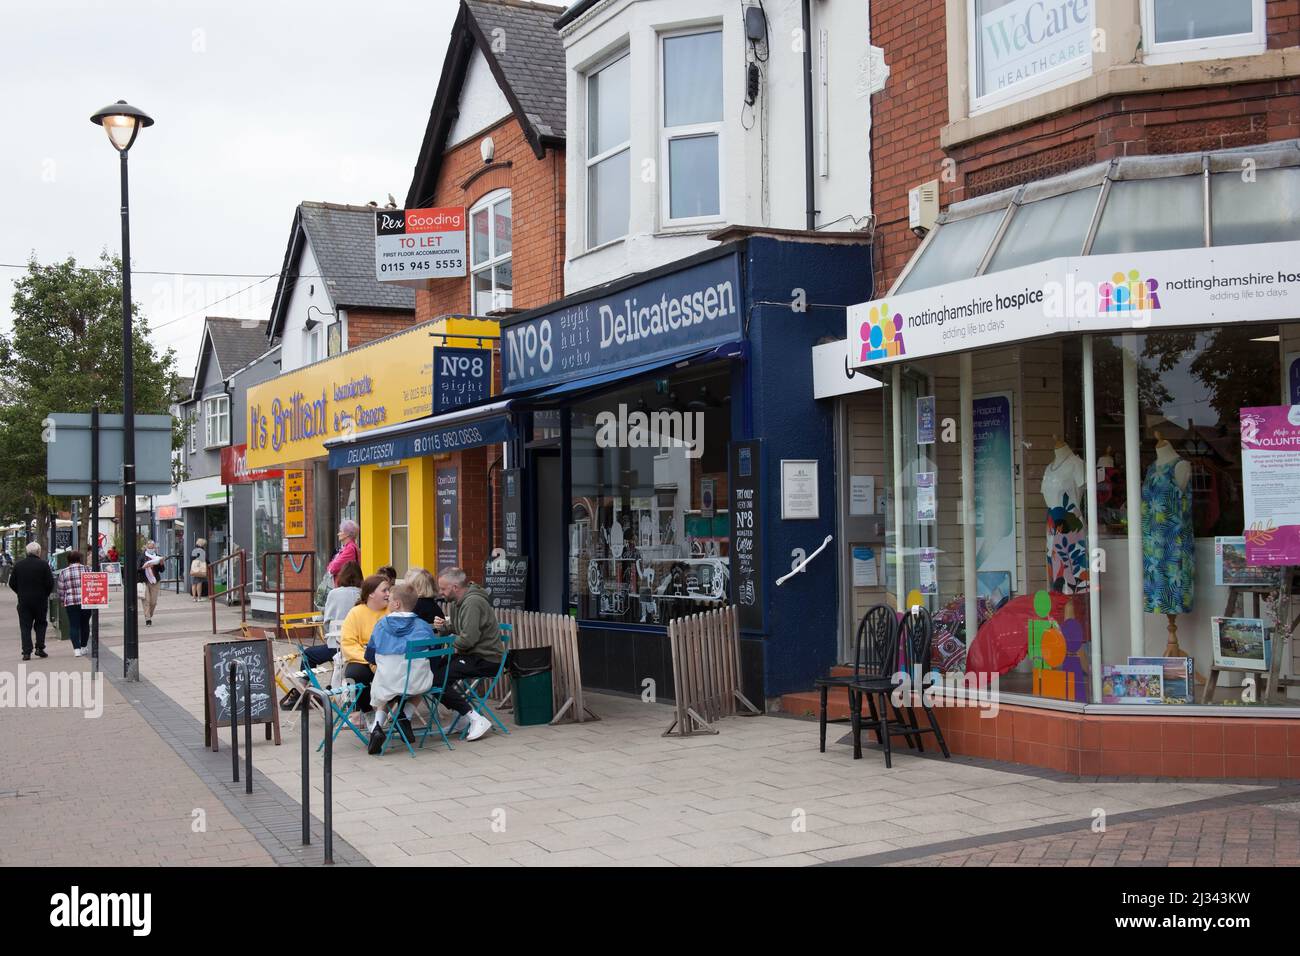 A row of shops and restaurants in West Bridgford, Nottinghamshire in the UK Stock Photo